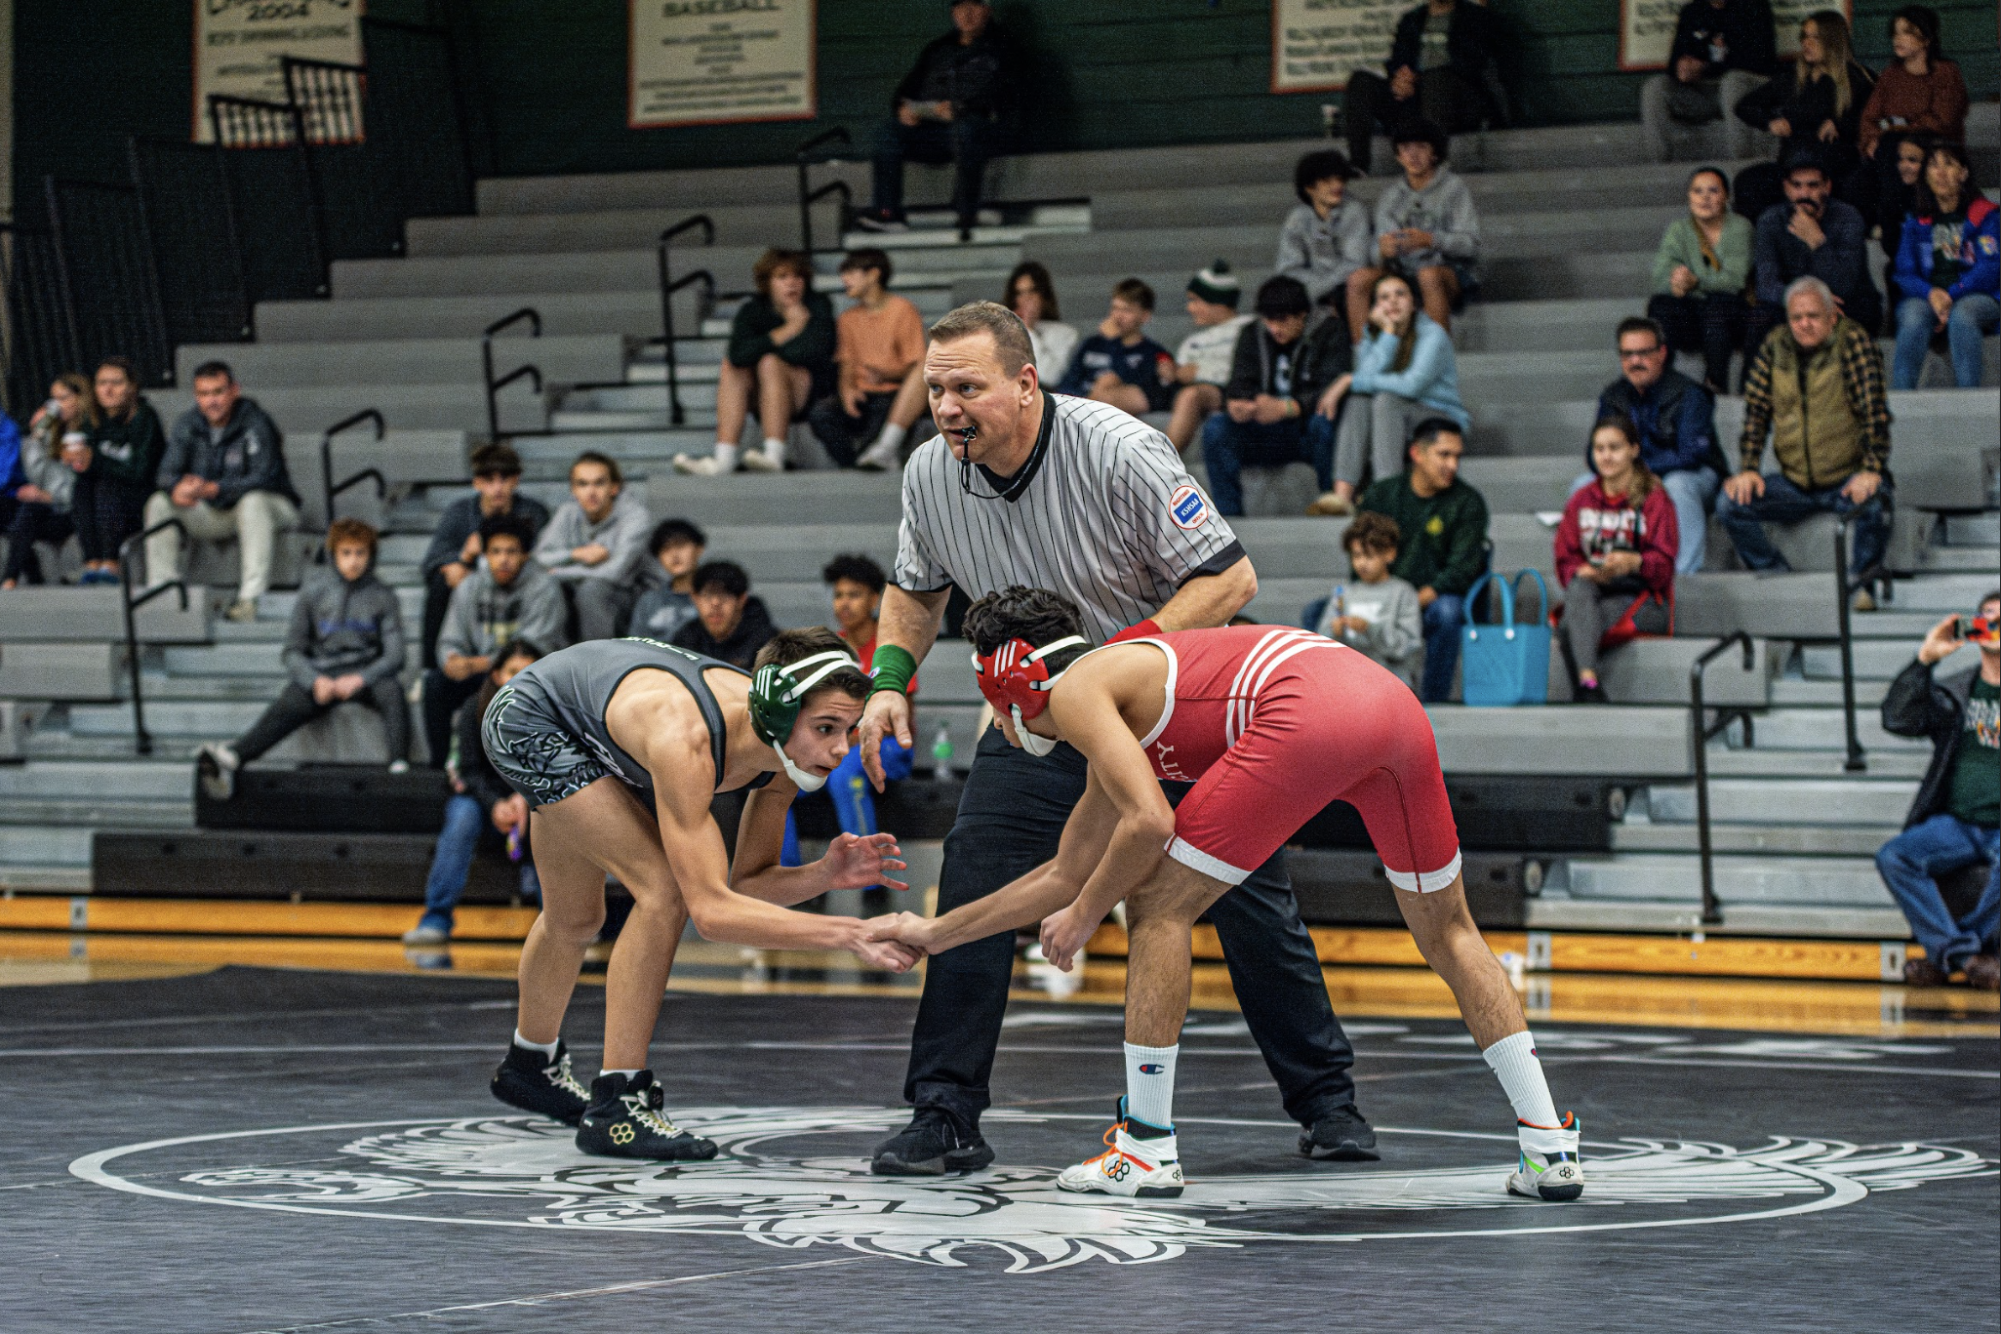 Junior Brayden Wilcox prepares to take on his opponent at the first home boys varsity wrestling meet of the season. The Firebirds came out on top, winning 54-24 overall.

